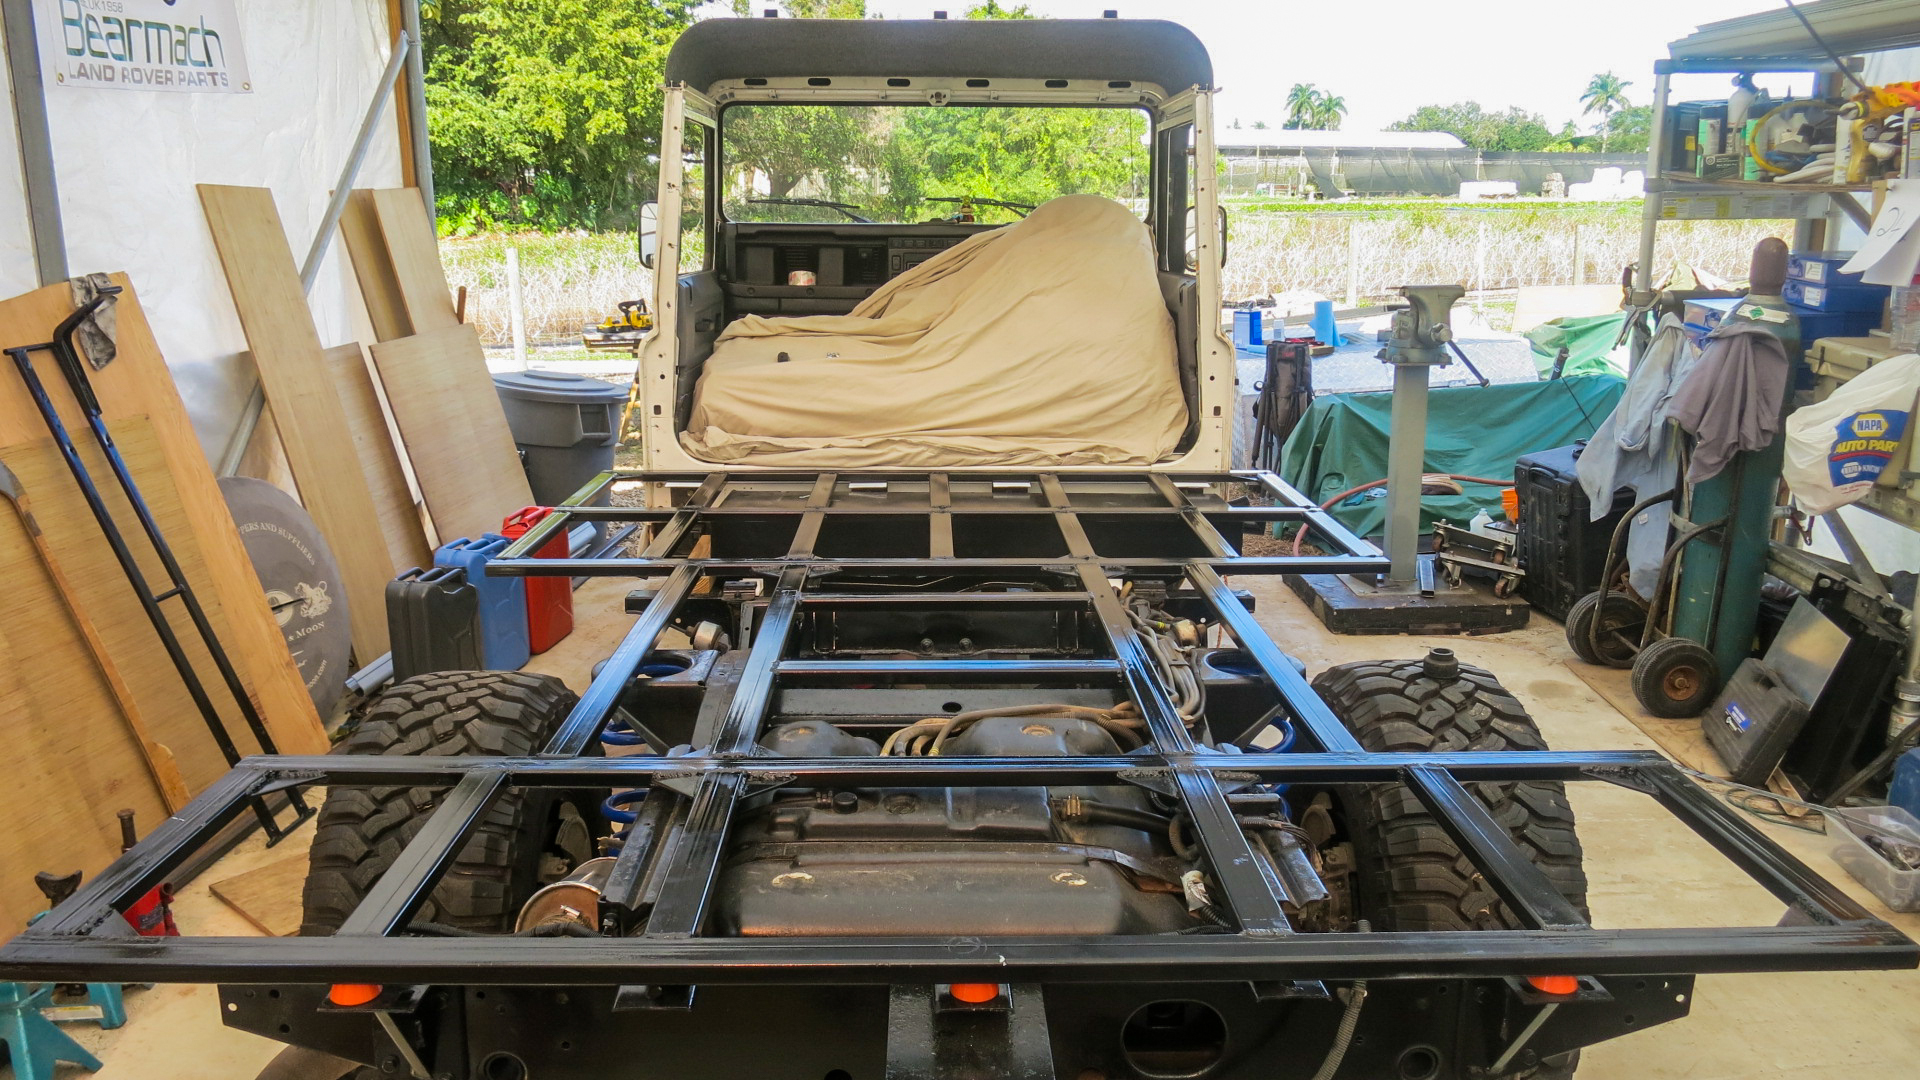 The Defender chassis had to be strong and flexible.